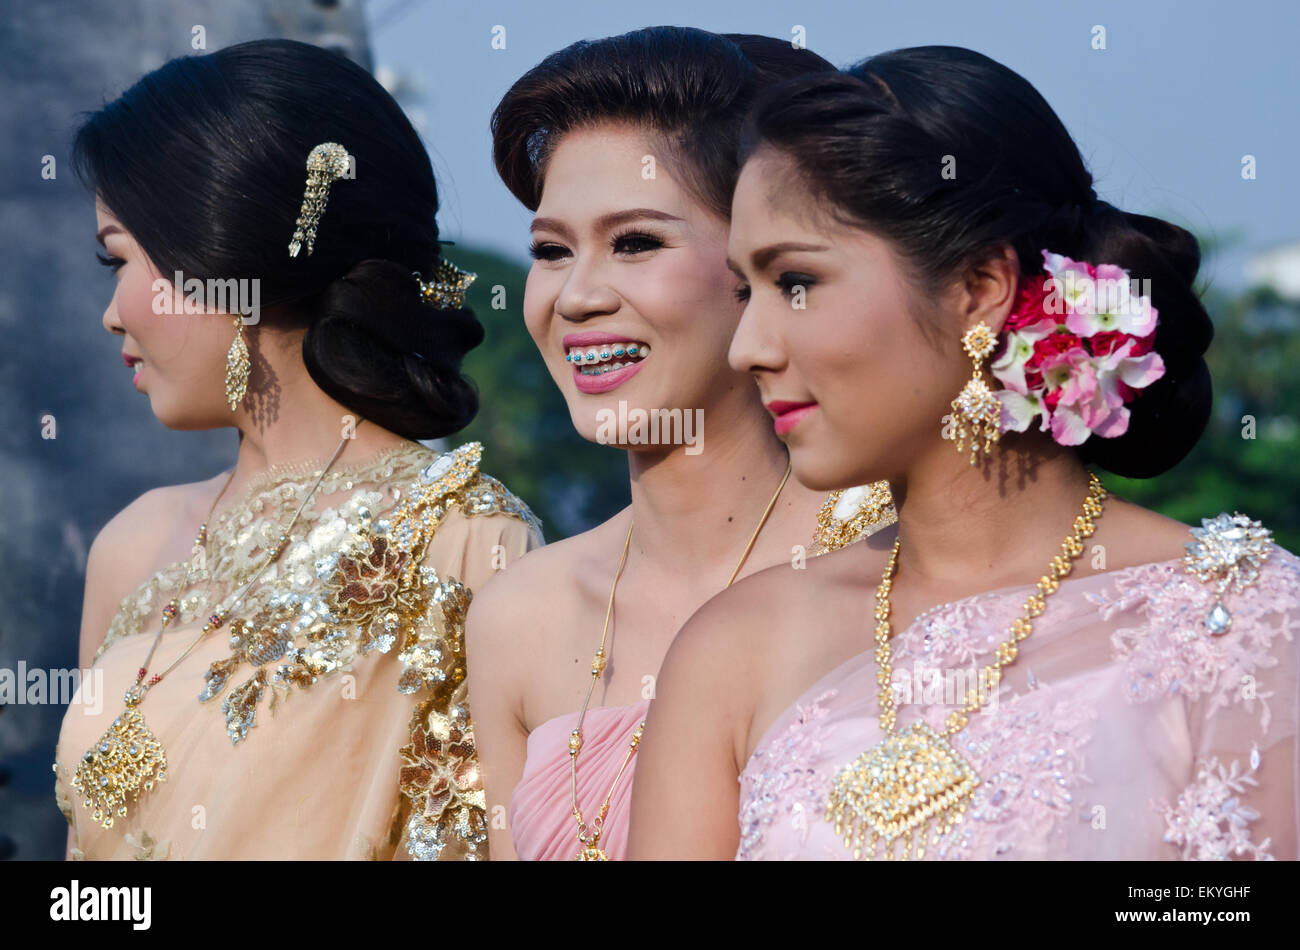 A Thai bride and her bridesmaids enjoy a wedding ceremony in Thailand. Bride shows beautiful teeth and braces. Stock Photo